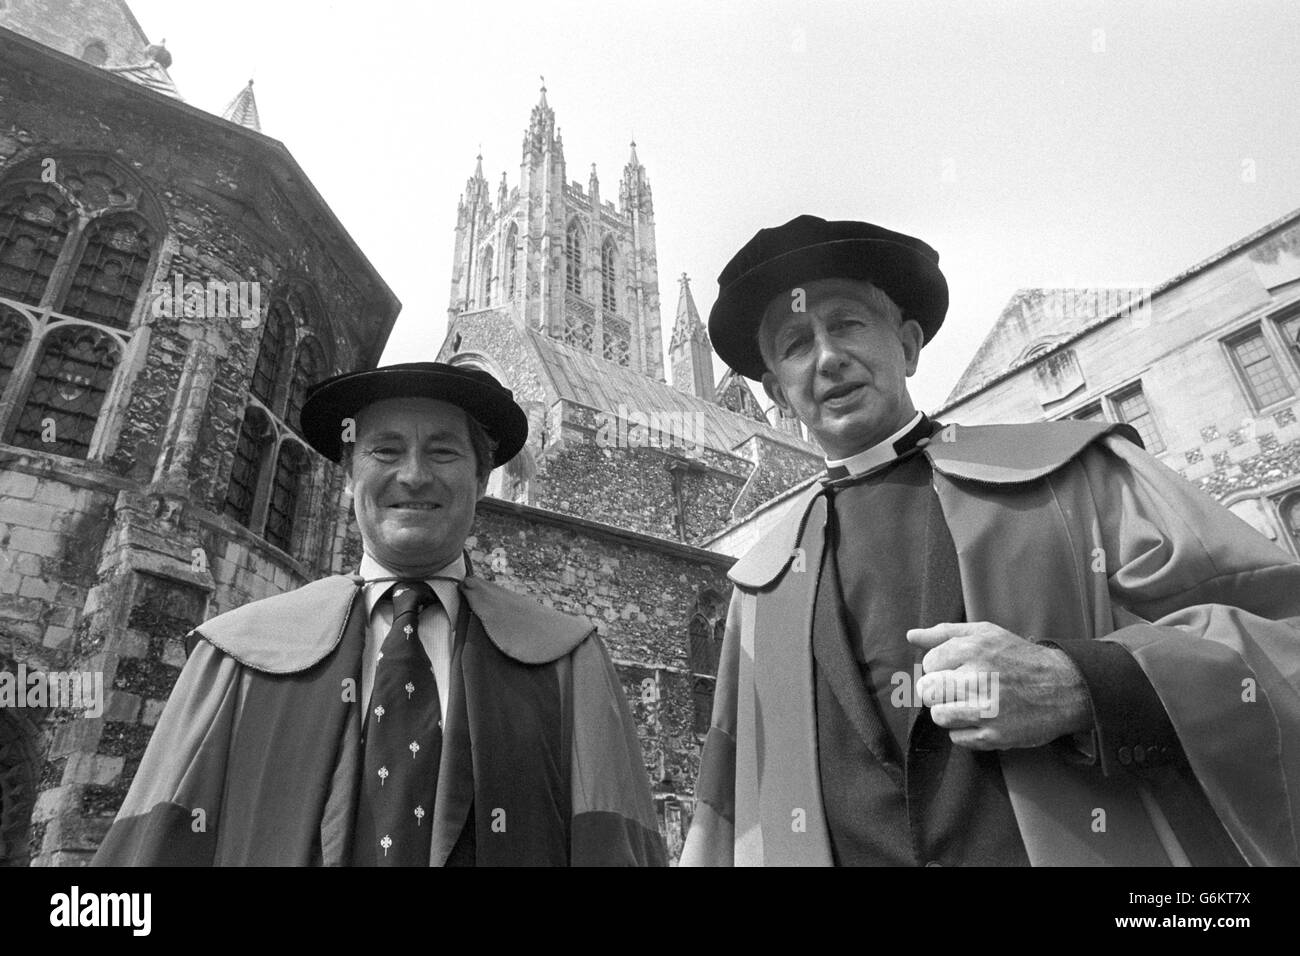 Governor of the Bank of England Robin Leigh-Pemberton (left) with Cardinal Basil Hume, Archbishop of Westminter, at Canterbury Cathedral. They received honorary degrees from the University of Kent. Stock Photo